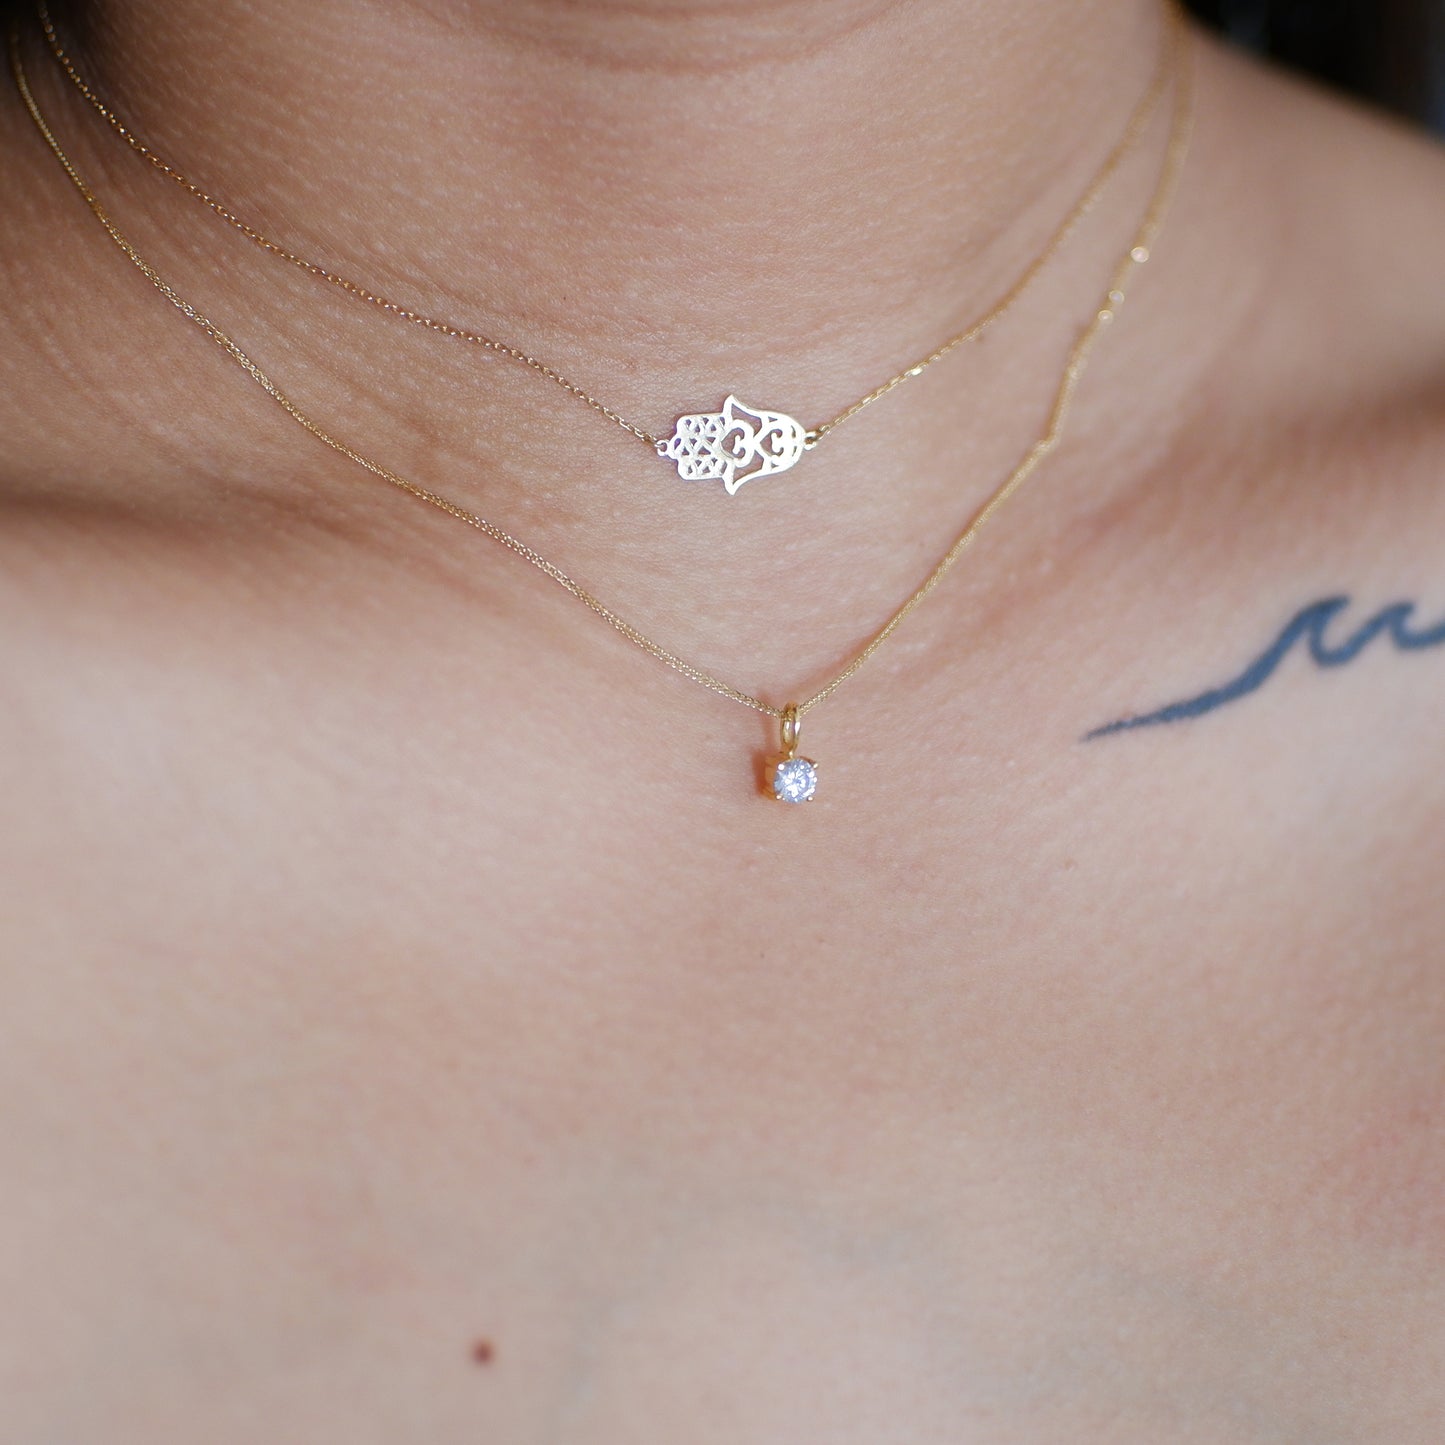 The Tiny Solitaire Birthstone Pendant in Solid Gold